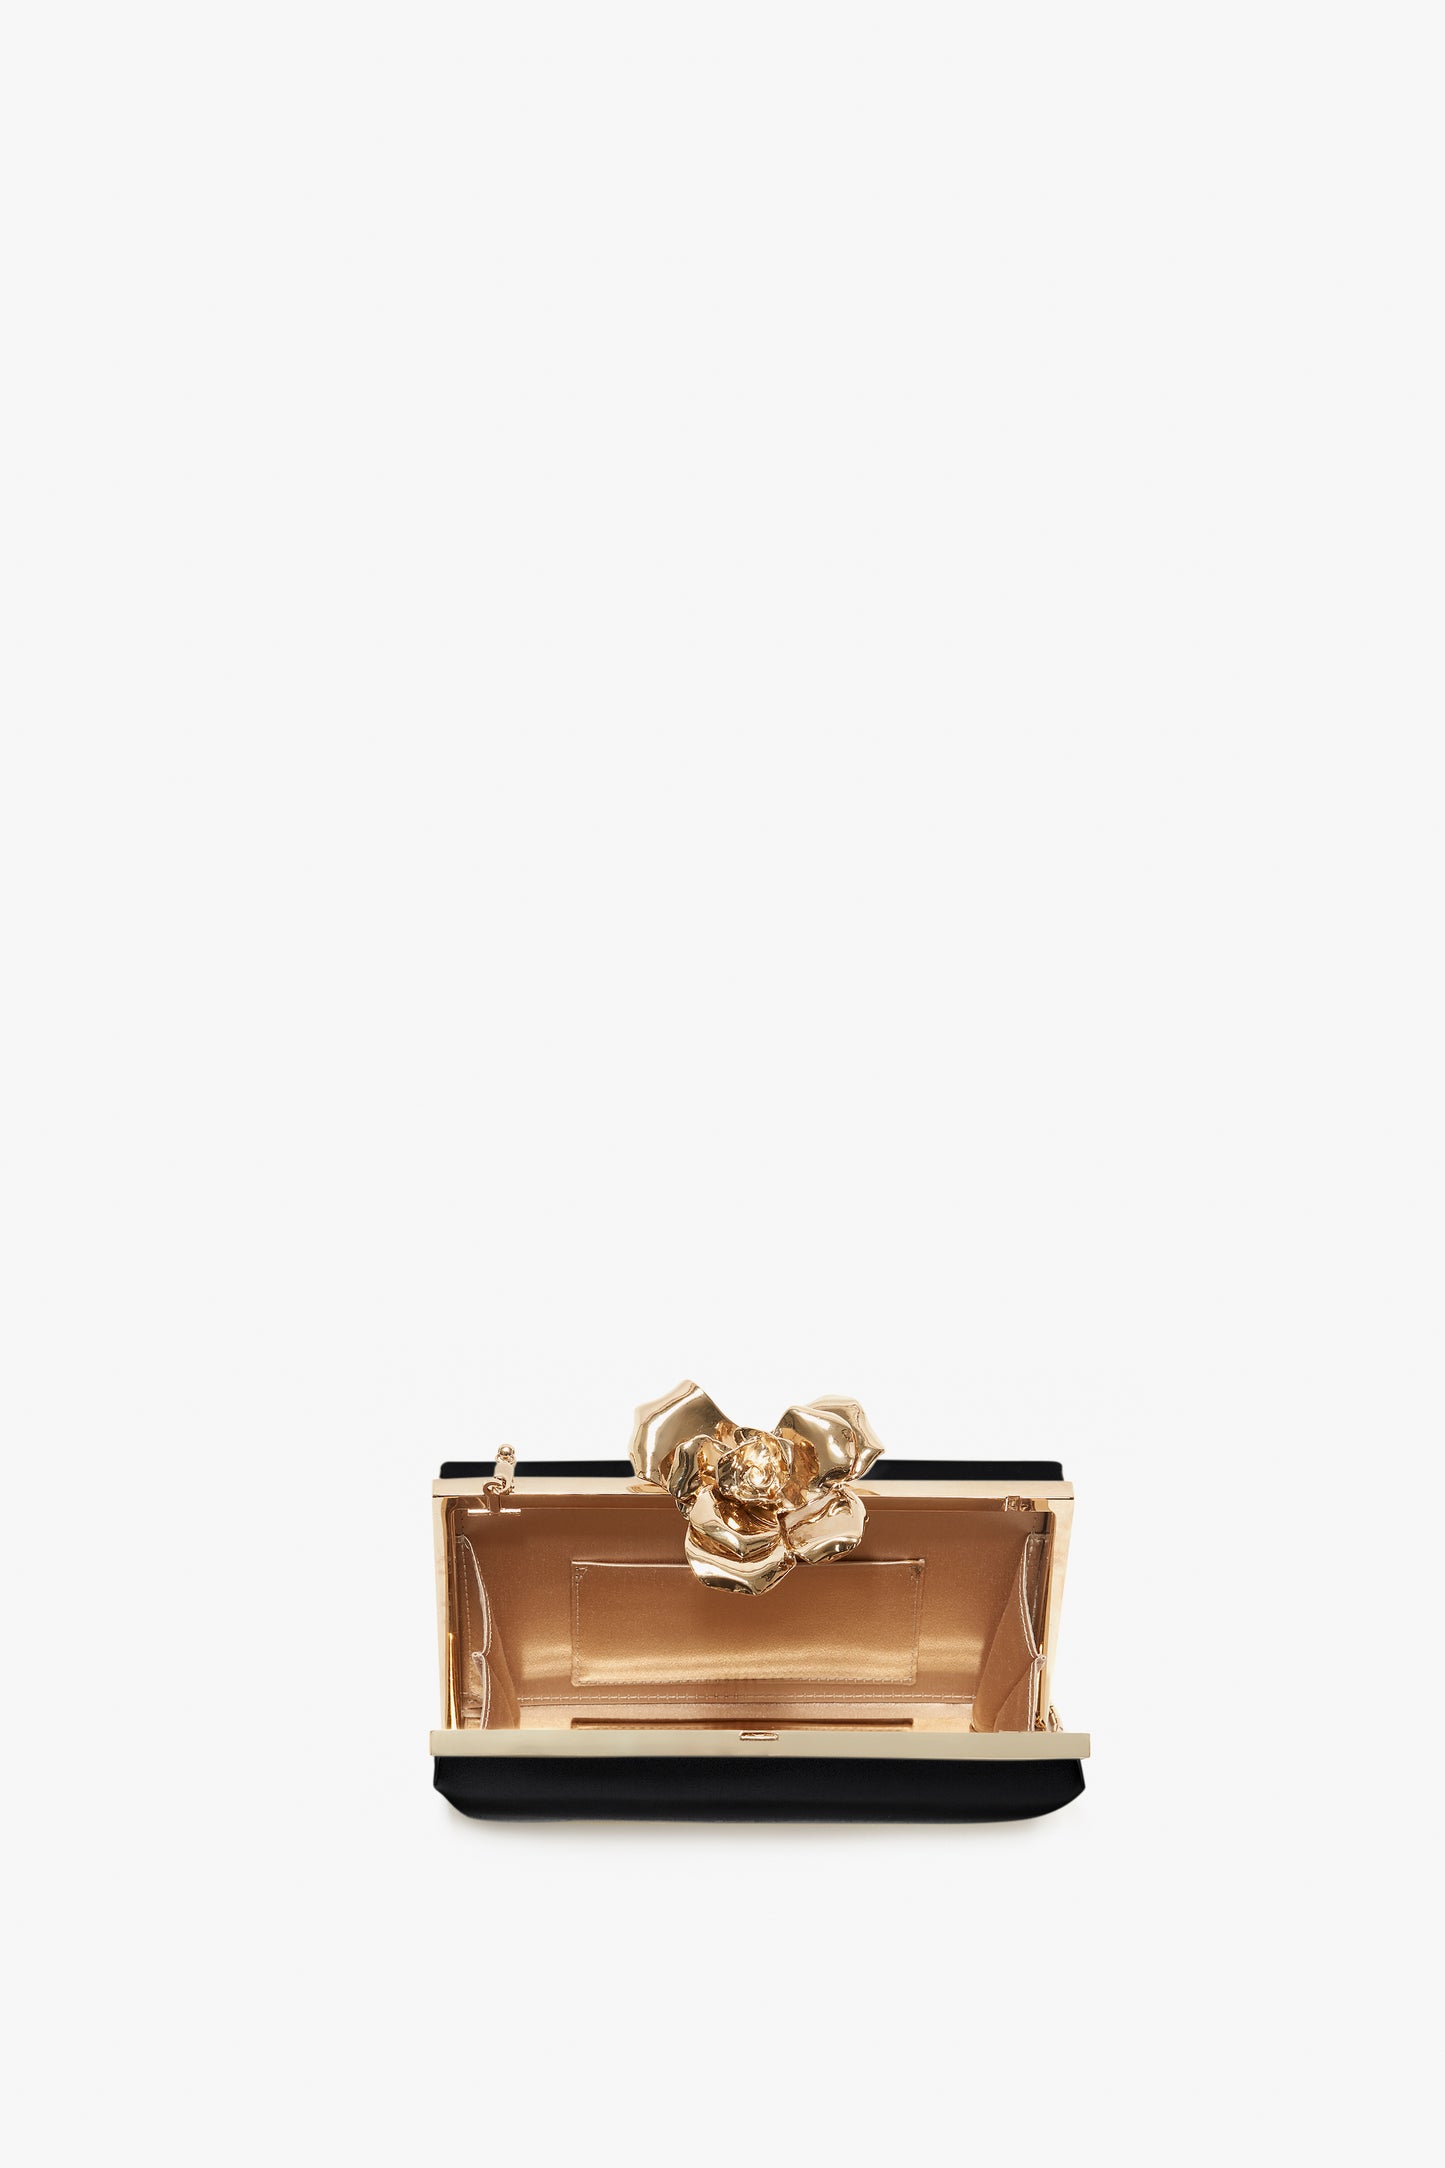 A small, elegant Victoria Beckham black Frame Flower Minaudiere clutch purse with a prominent gold floral clasp and a detachable shoulder strap, displayed against a white background.